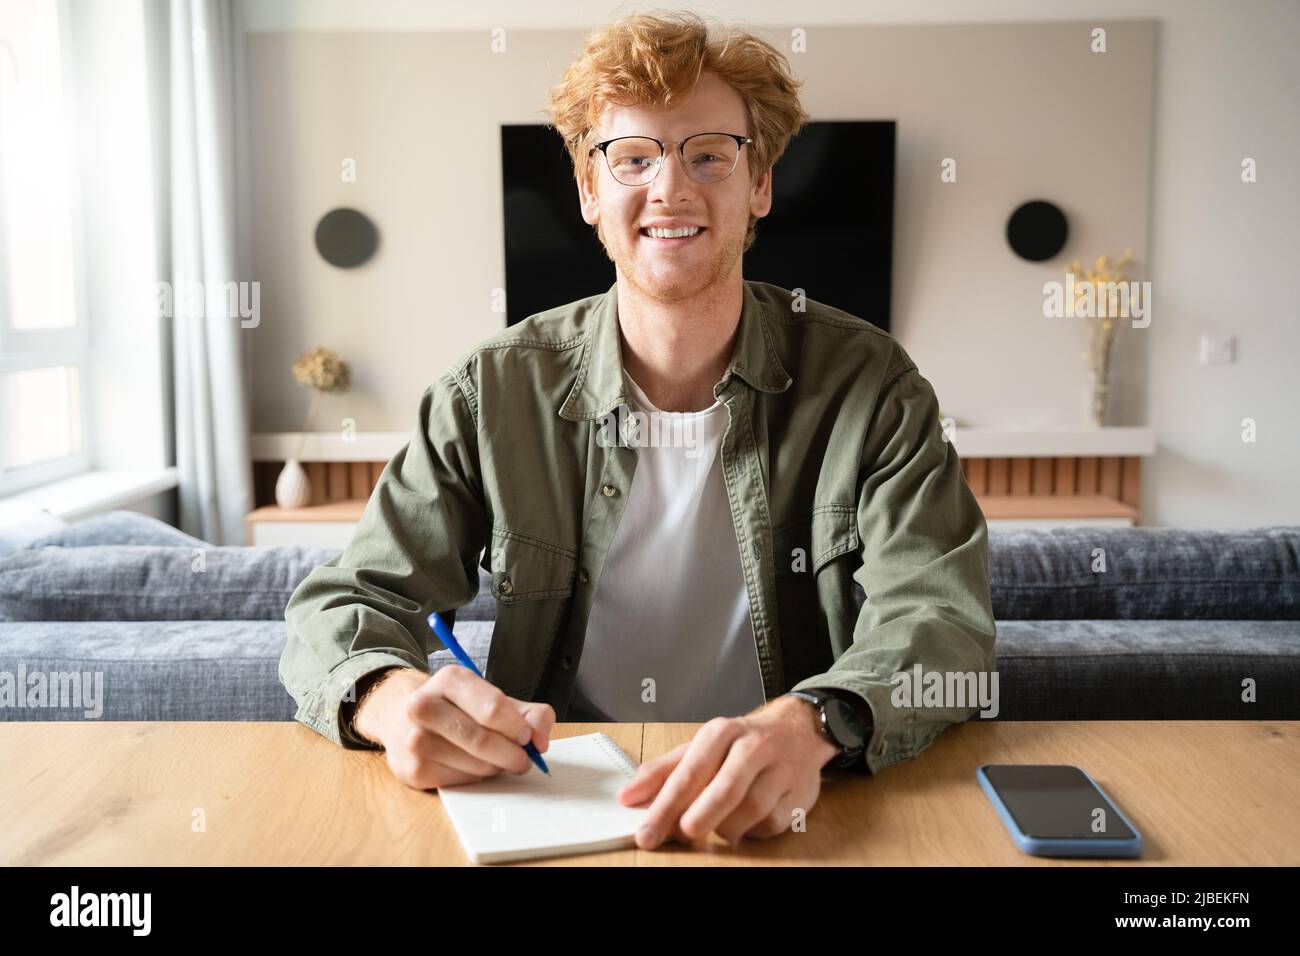 Young man writing notes looking at camera holding videoconference webcam view Stock Photo